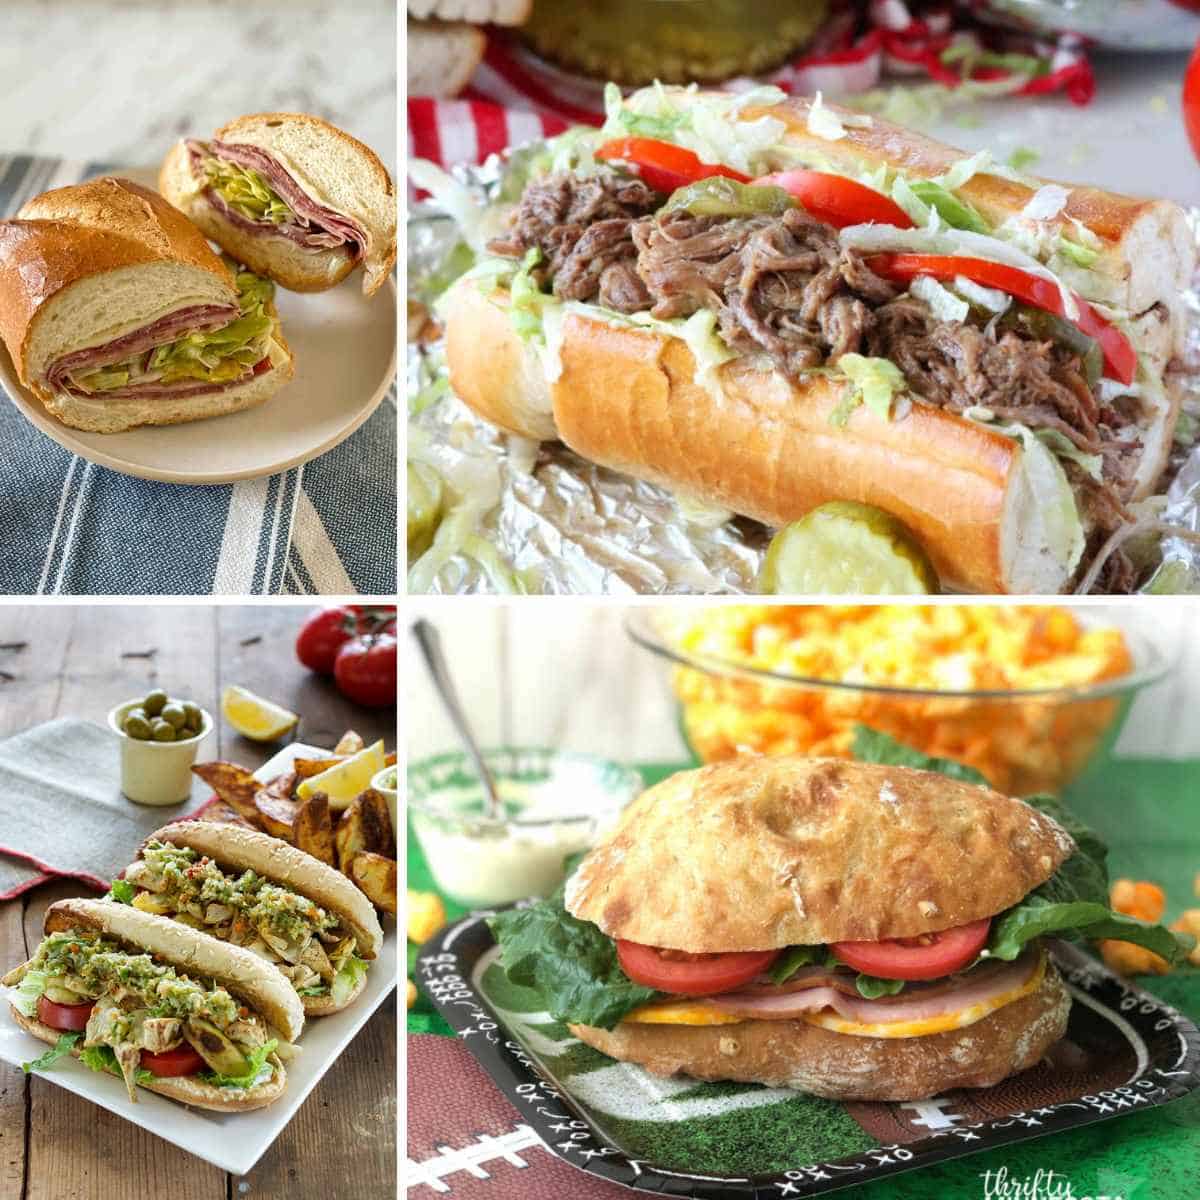 4 different sandwiches that a crowd of people will eat on game day